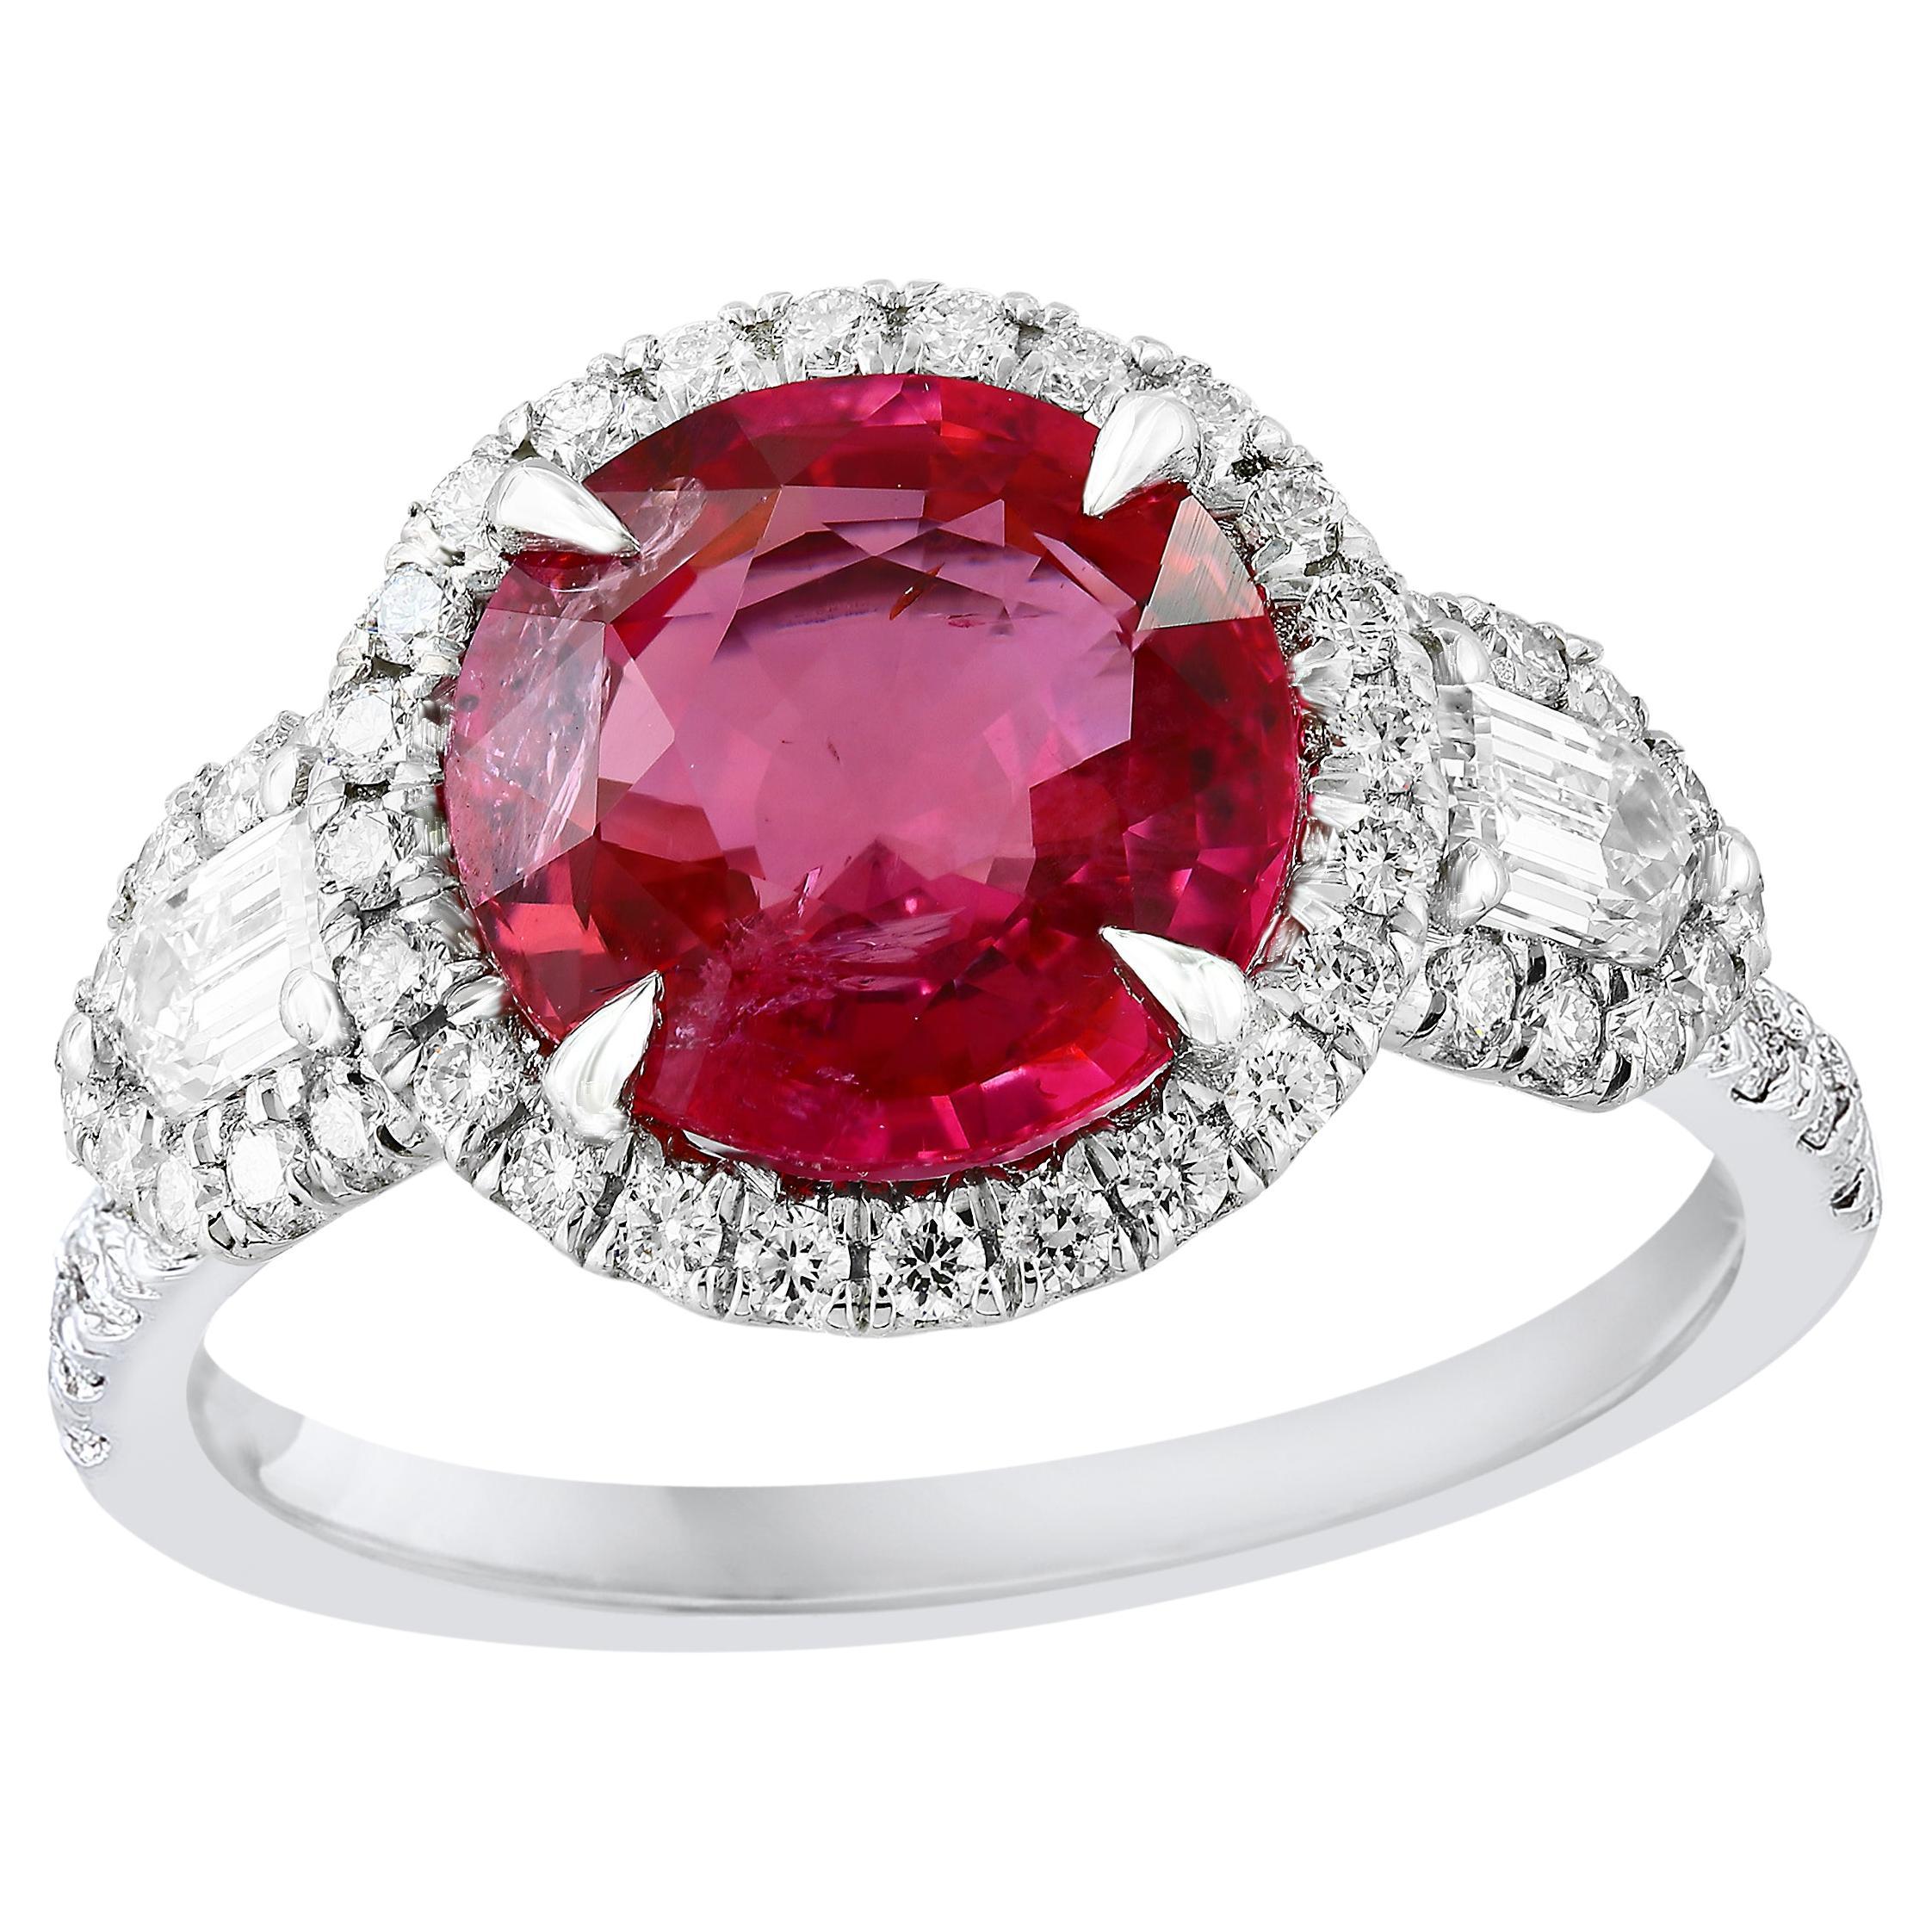 3.28 Carat Round Cut Ruby and Diamond 3 Stone Halo Ring in Platinum